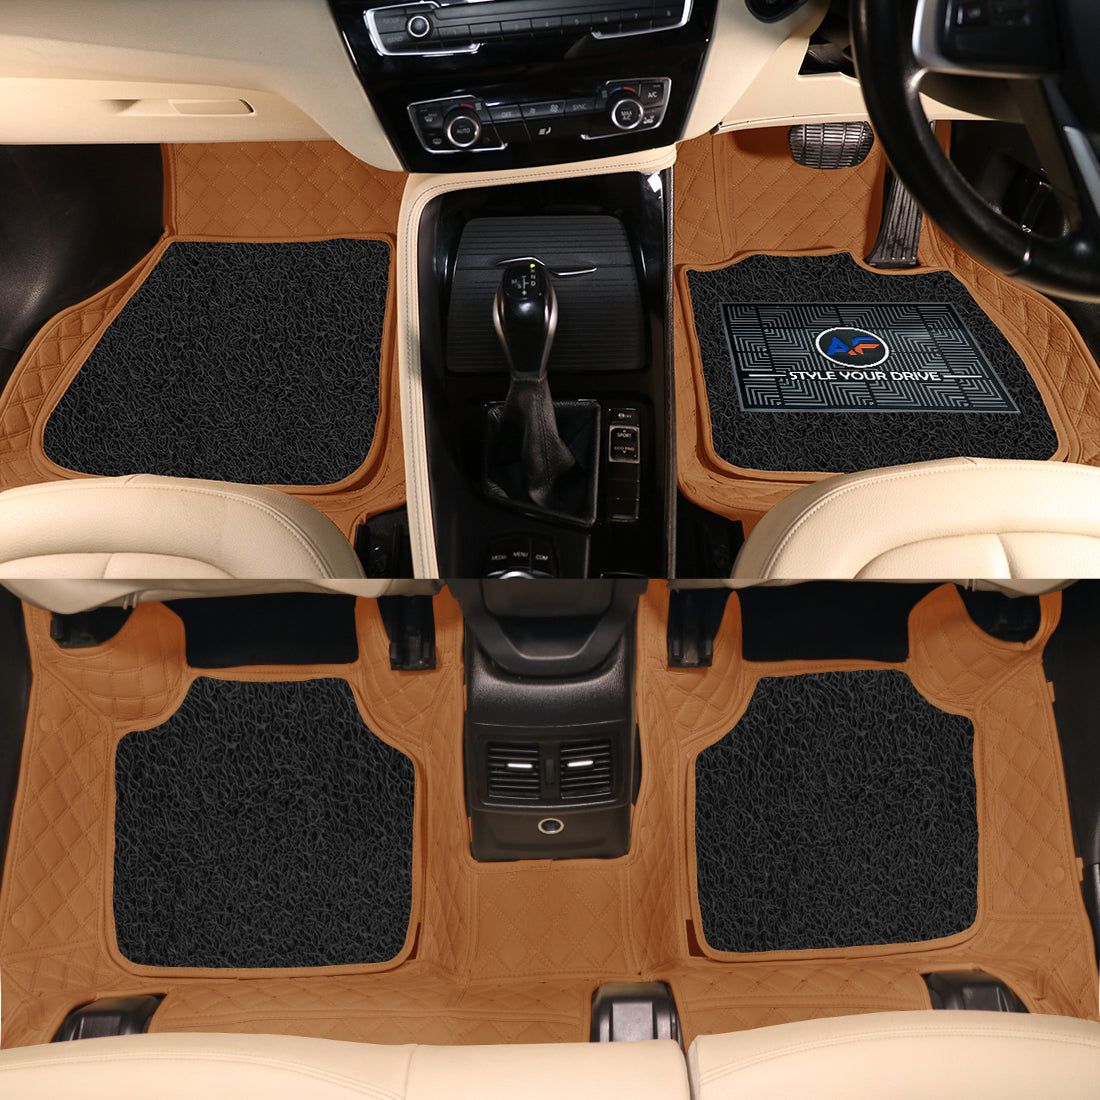 Mercedes SLK 350 2015 7D Luxury Car Mat, All Weather Proof, Anti-Skid, 100% Waterproof & Odorless with Unique Diamond Fish Design (24mm Luxury PU Leather, 2 Rows)